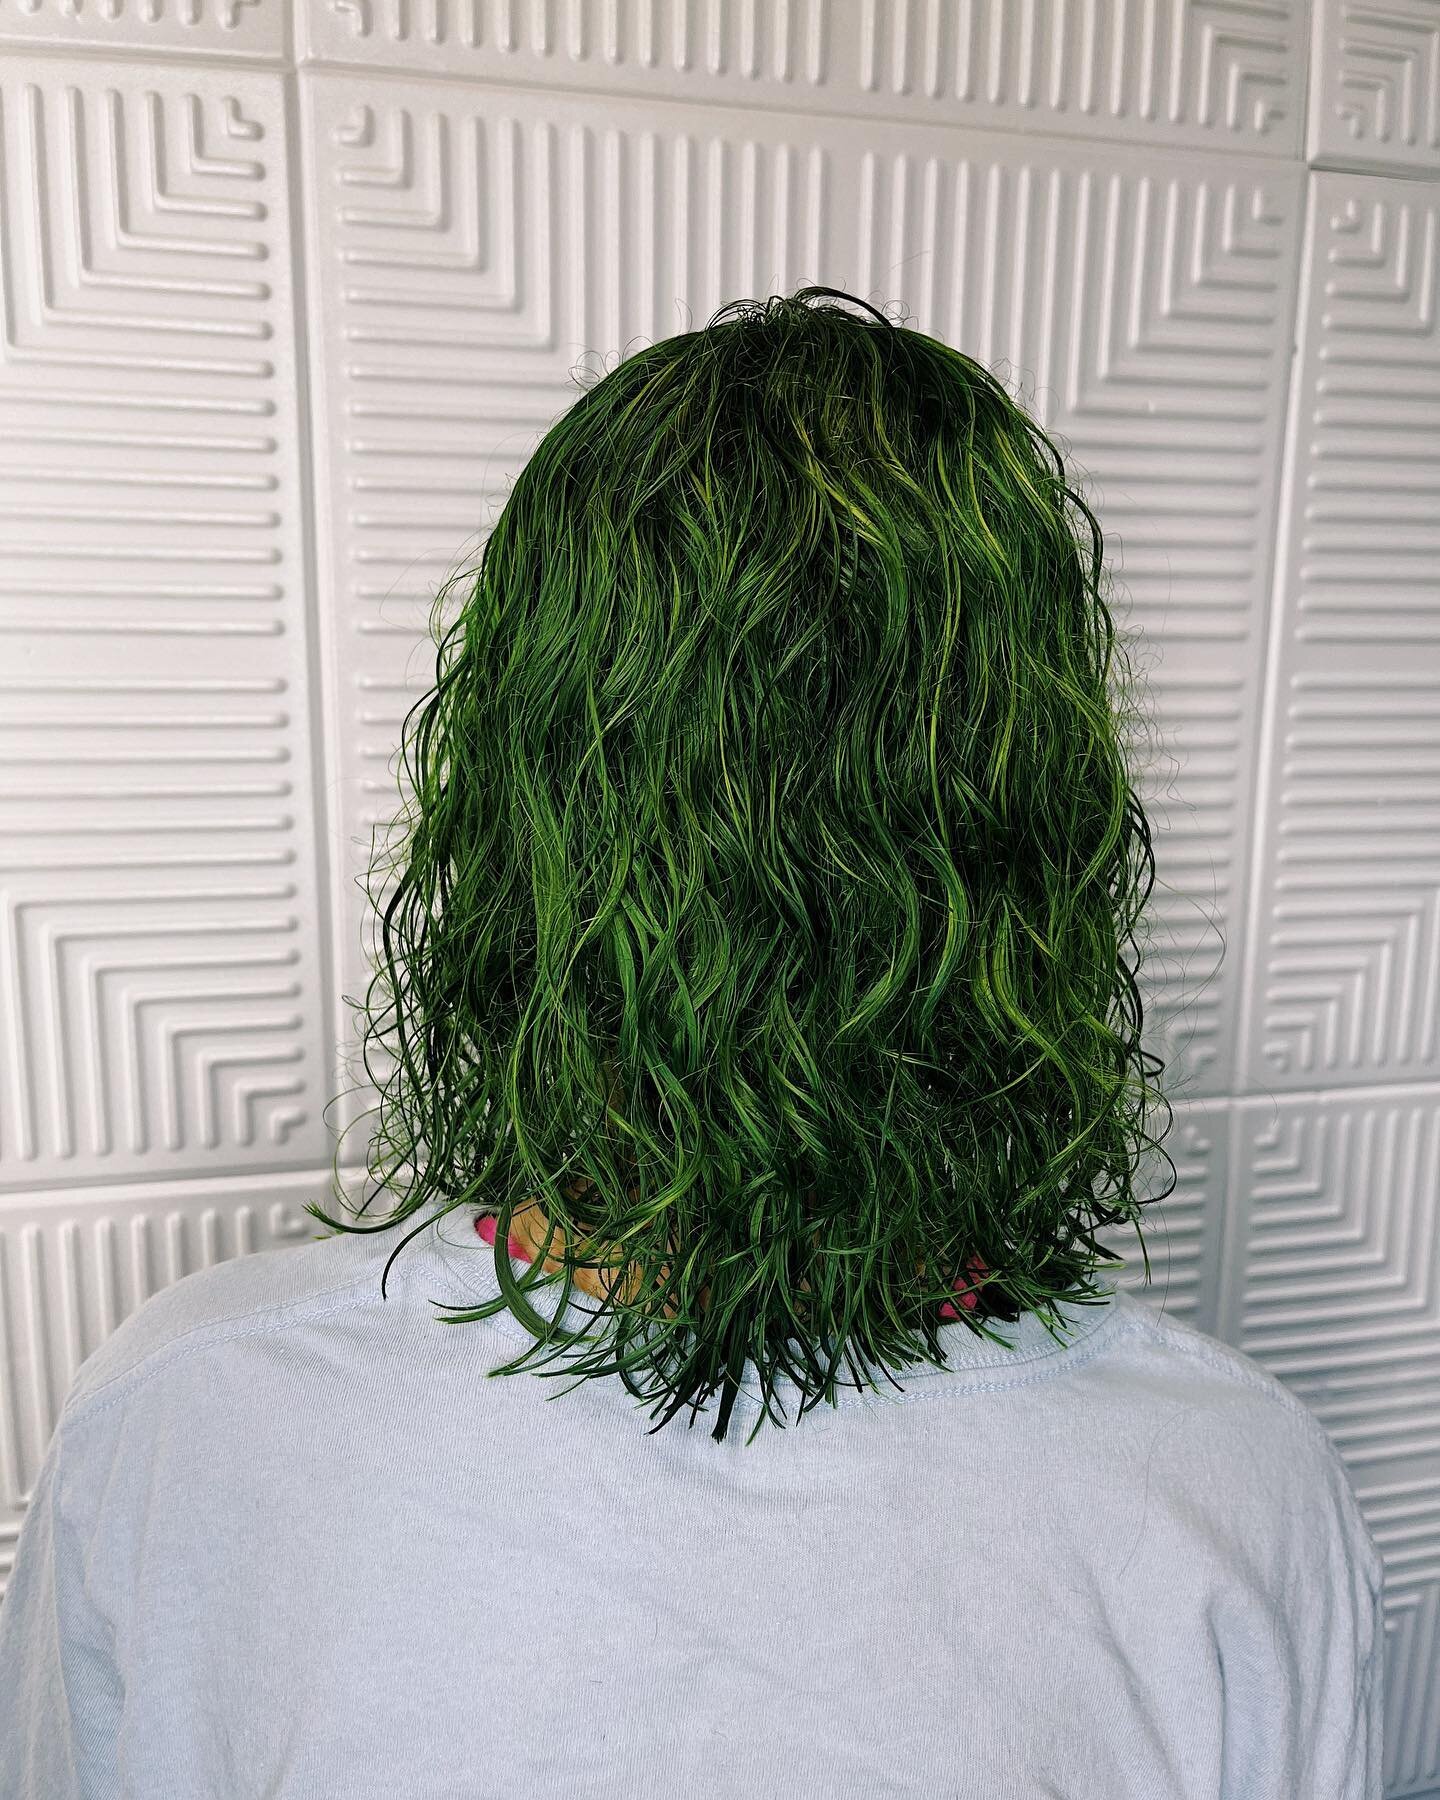 how cool is this green for Spider? i&rsquo;m obsessed with how it turned out 💚 swipe for the before! 

&bull;
&bull;
&bull;
&bull;
&bull;
&bull;
&bull;
#greenhair #urbanfringe #nc #salon #stylist #paulmitchellsalons #chapelhillsalon #colortransforma